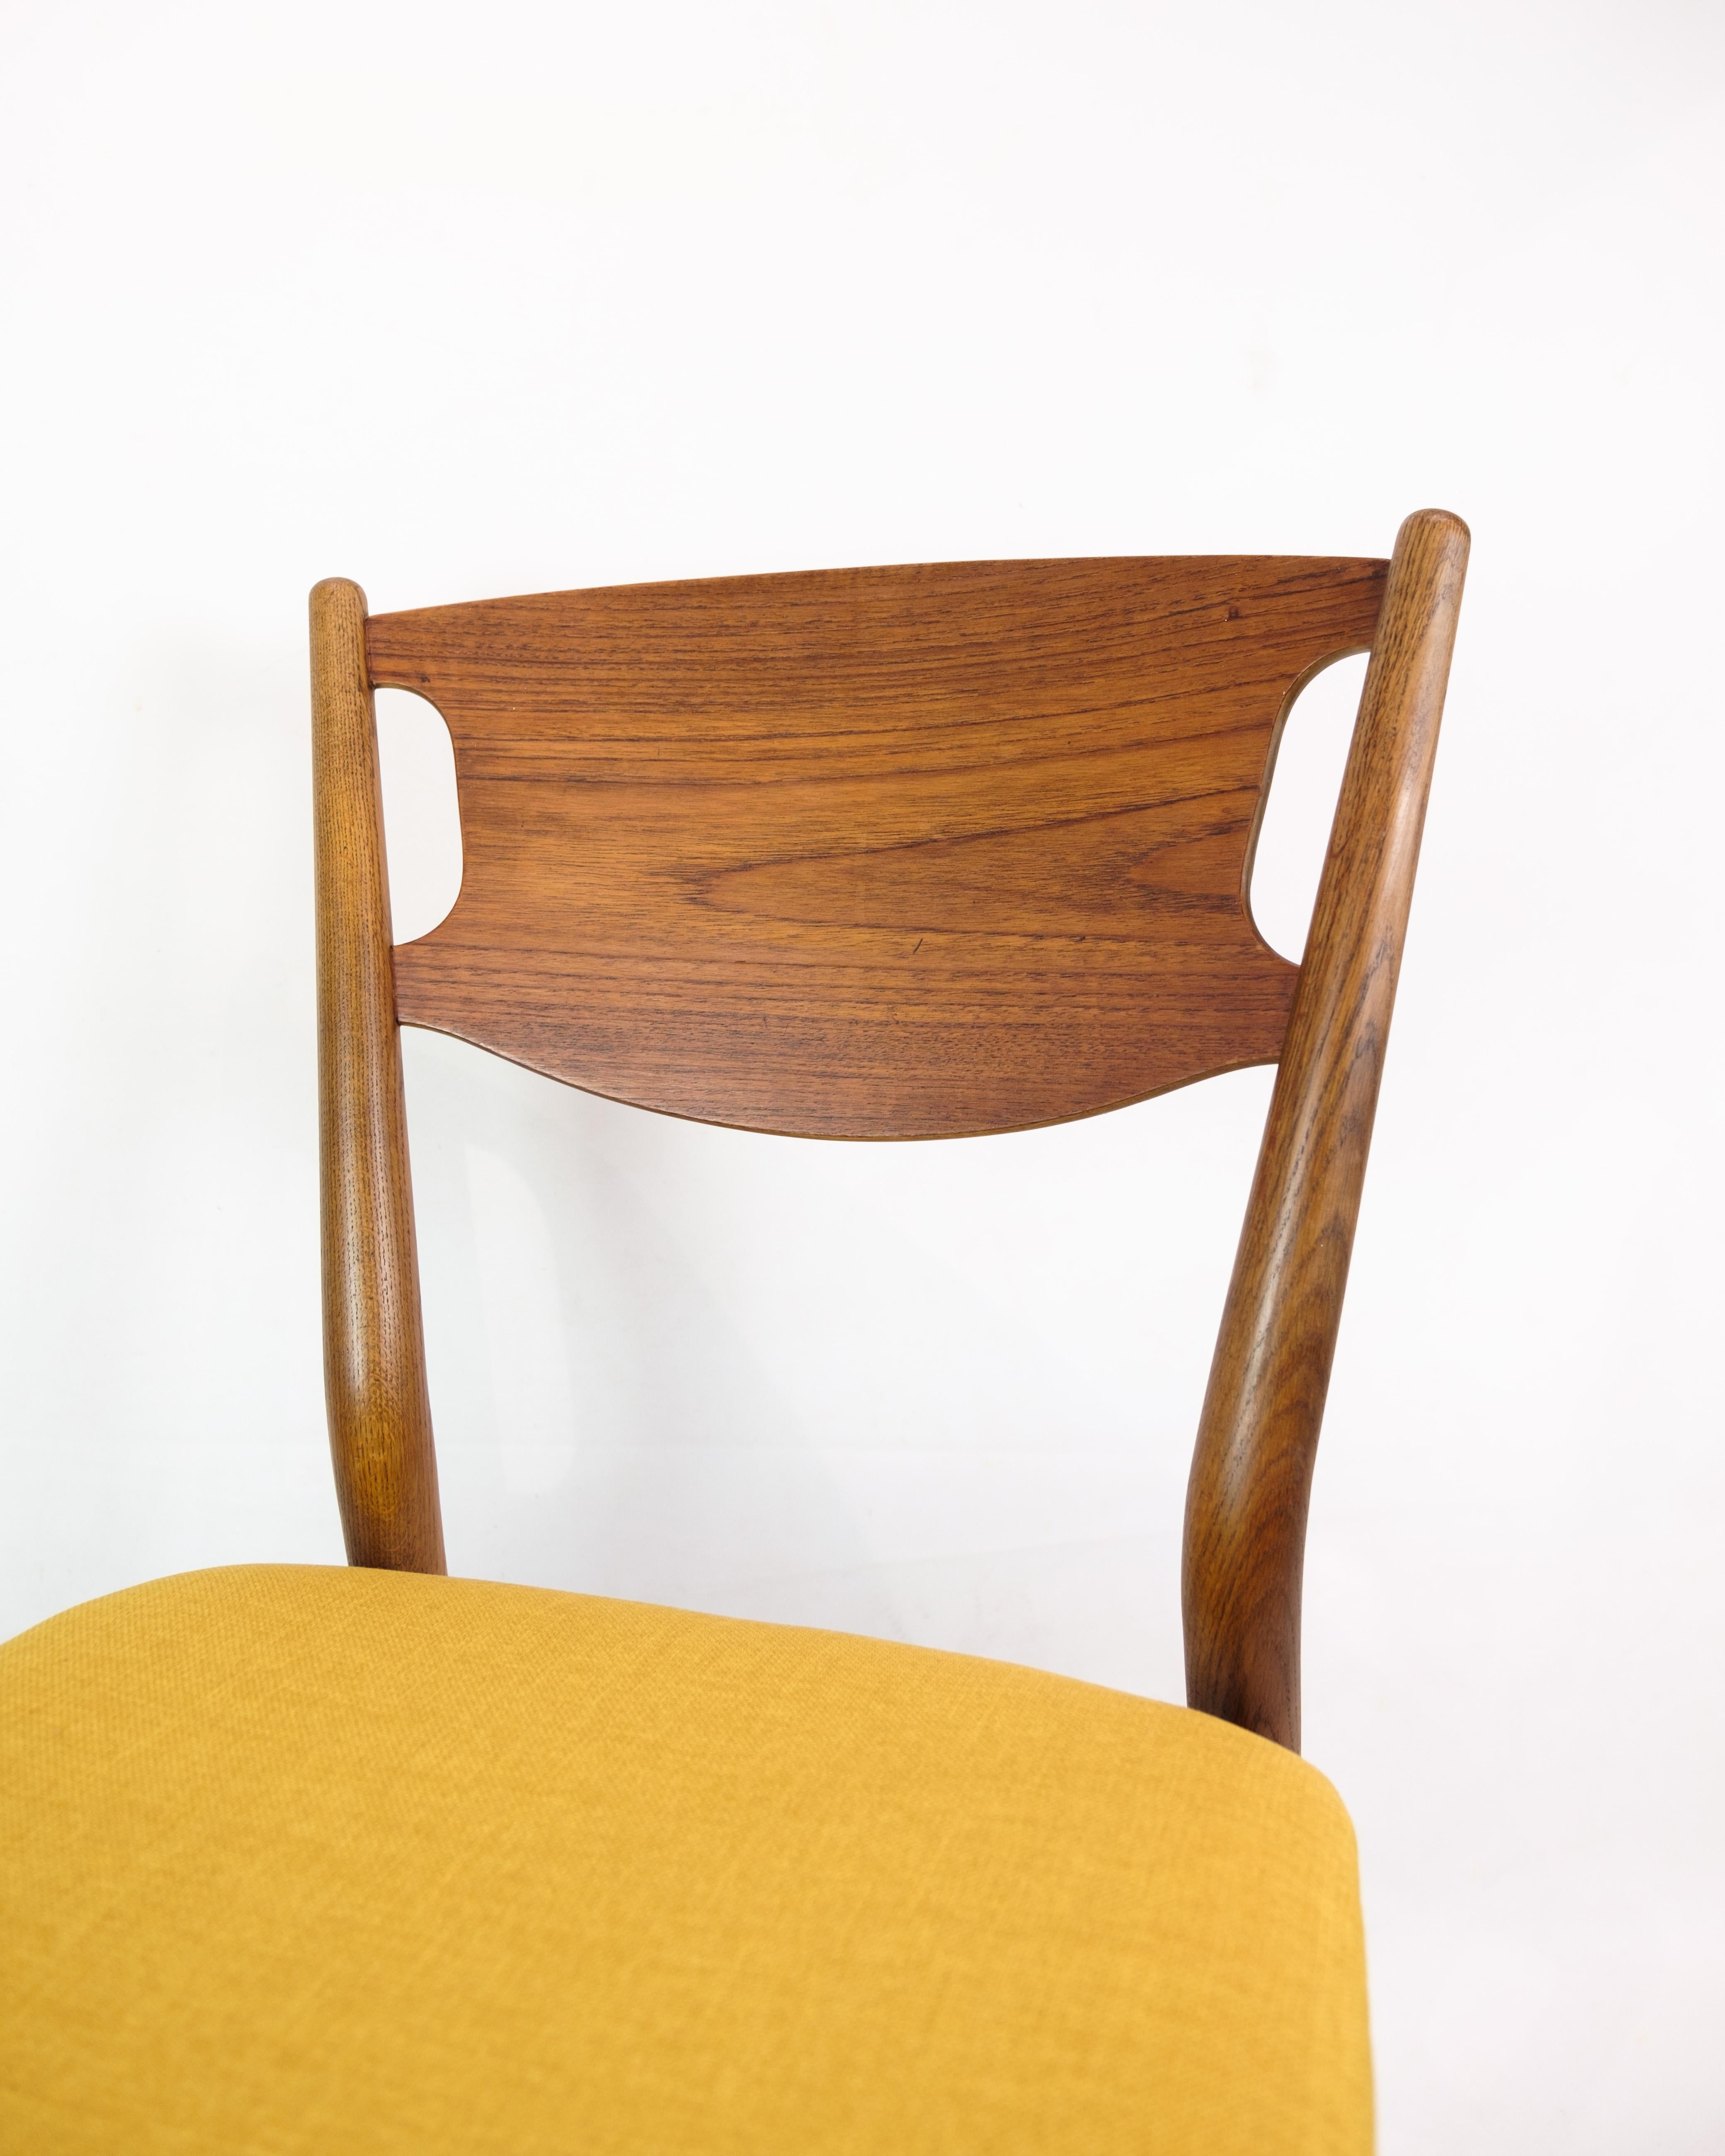 4 Dining Room Chairs, Danish Design, Teak Wood, Fabric Cover, 1960 For Sale 9